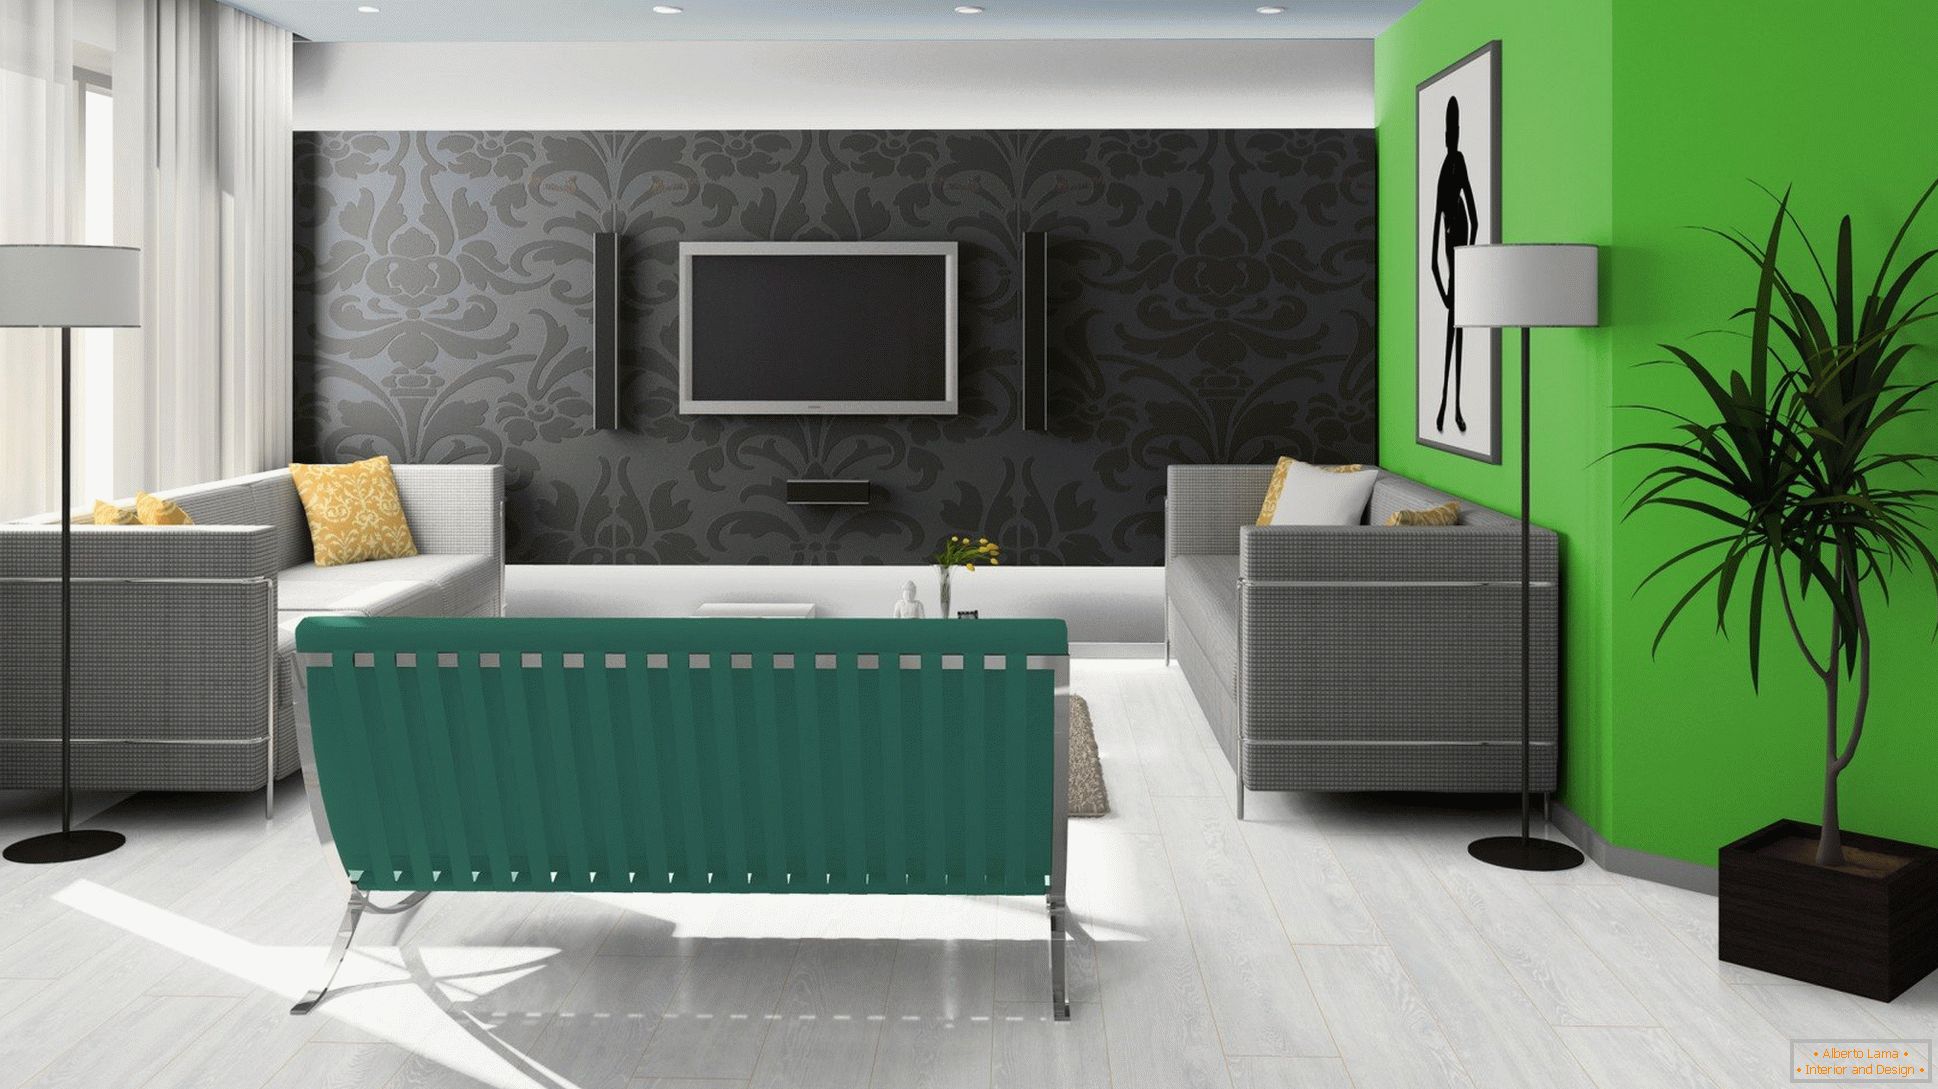 Black, green and white in the design of the living room